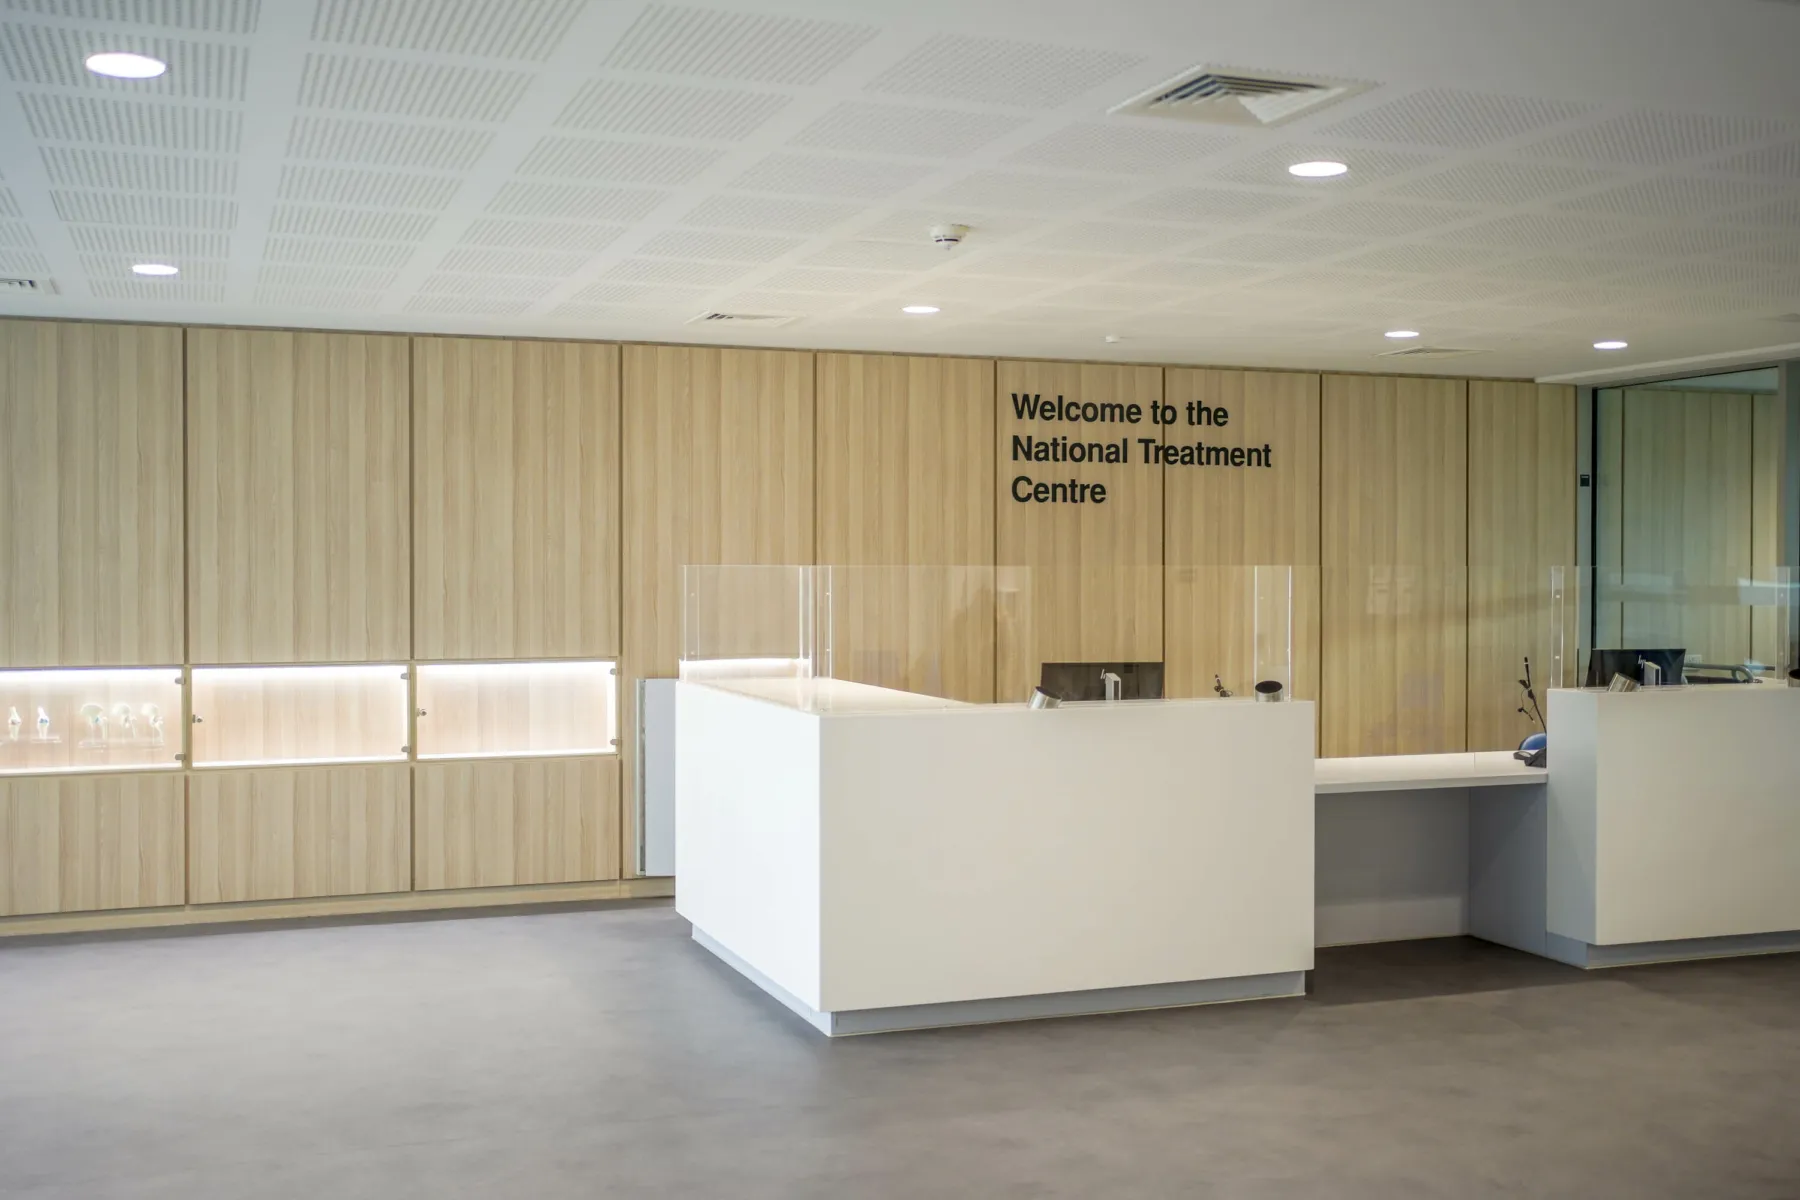 Reception area inside the National Treatment Centre - Fife Orthopaedics. A white reception desk in a large brightly lit space.